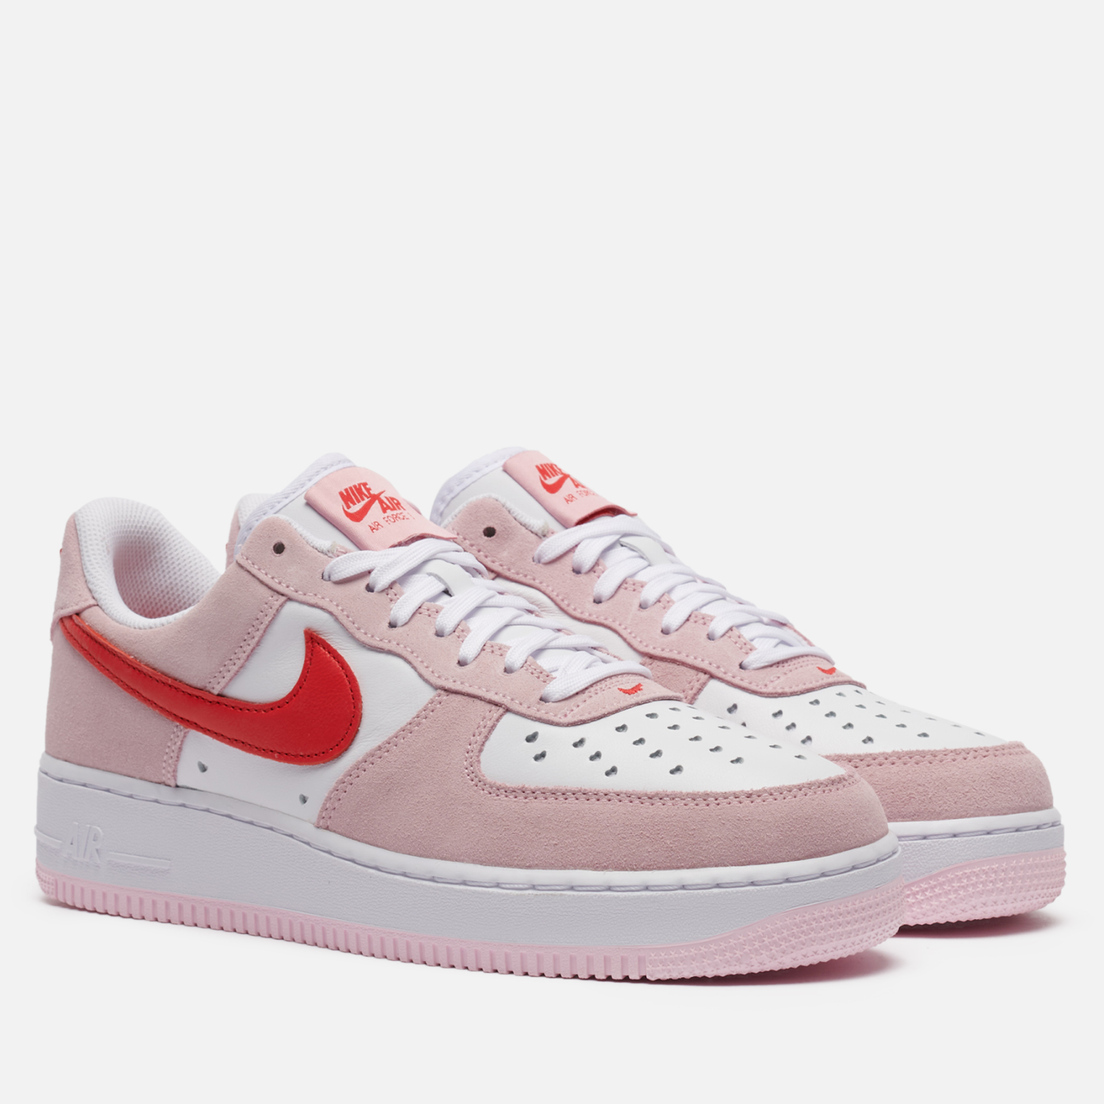 Nike air valentines day. Nike Air Force 1 Valentine's. Nike Air Force 1 Low “Valentine’s Day” 2023. Nike Air Force 1 Low Valentines Day. Nike Air Force 1 07 QS Valentine's Day.